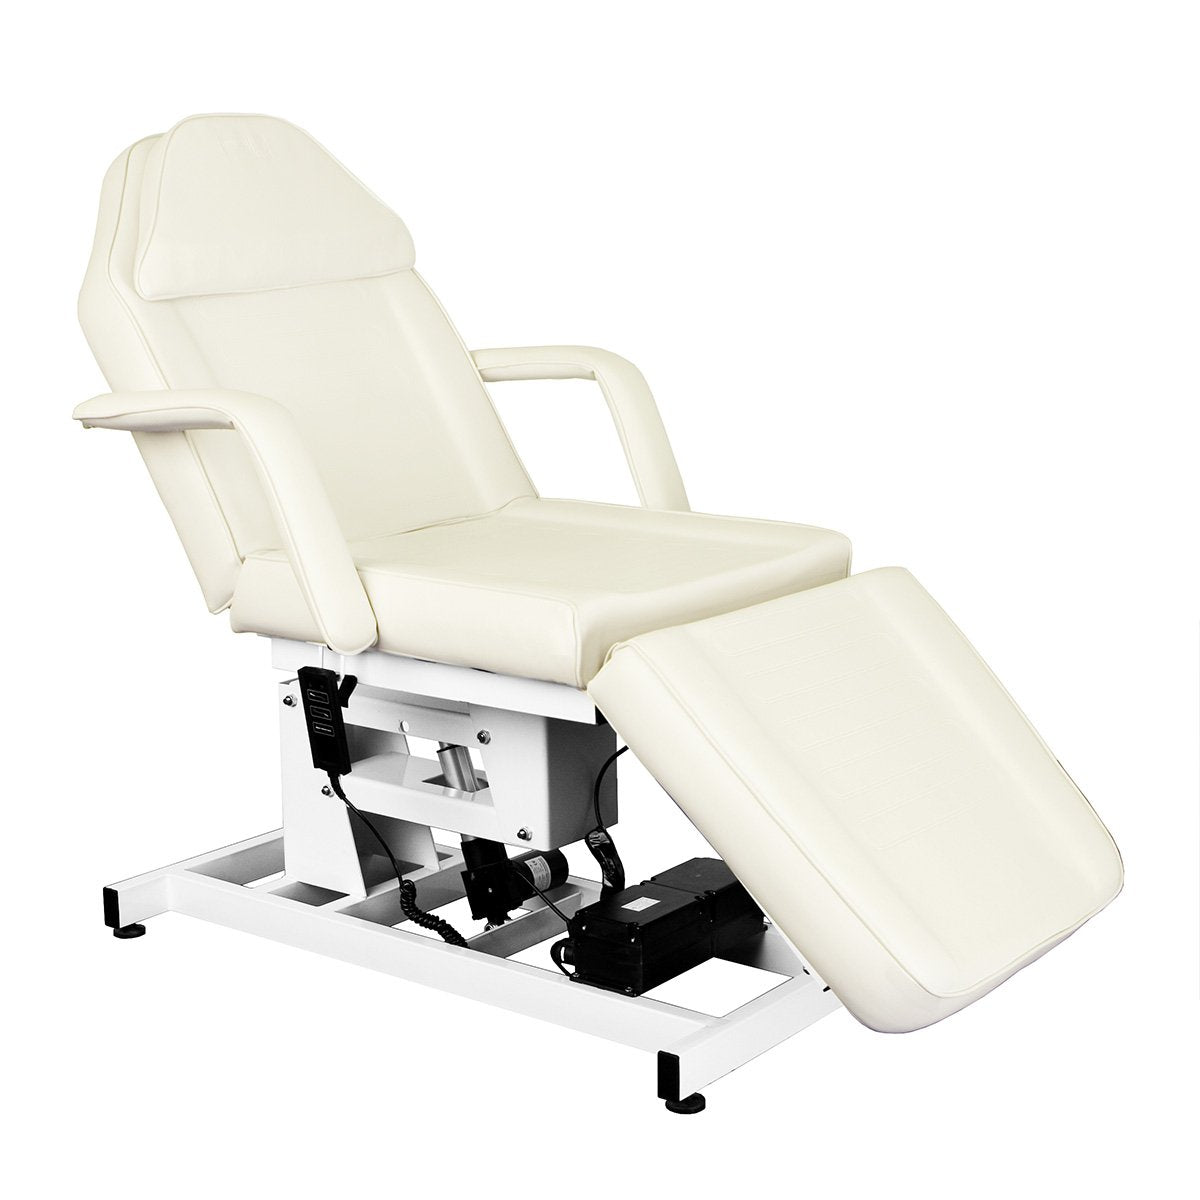 Comfort Soul Electric Pro Ultra Fully Electronic Facial Bed Chair